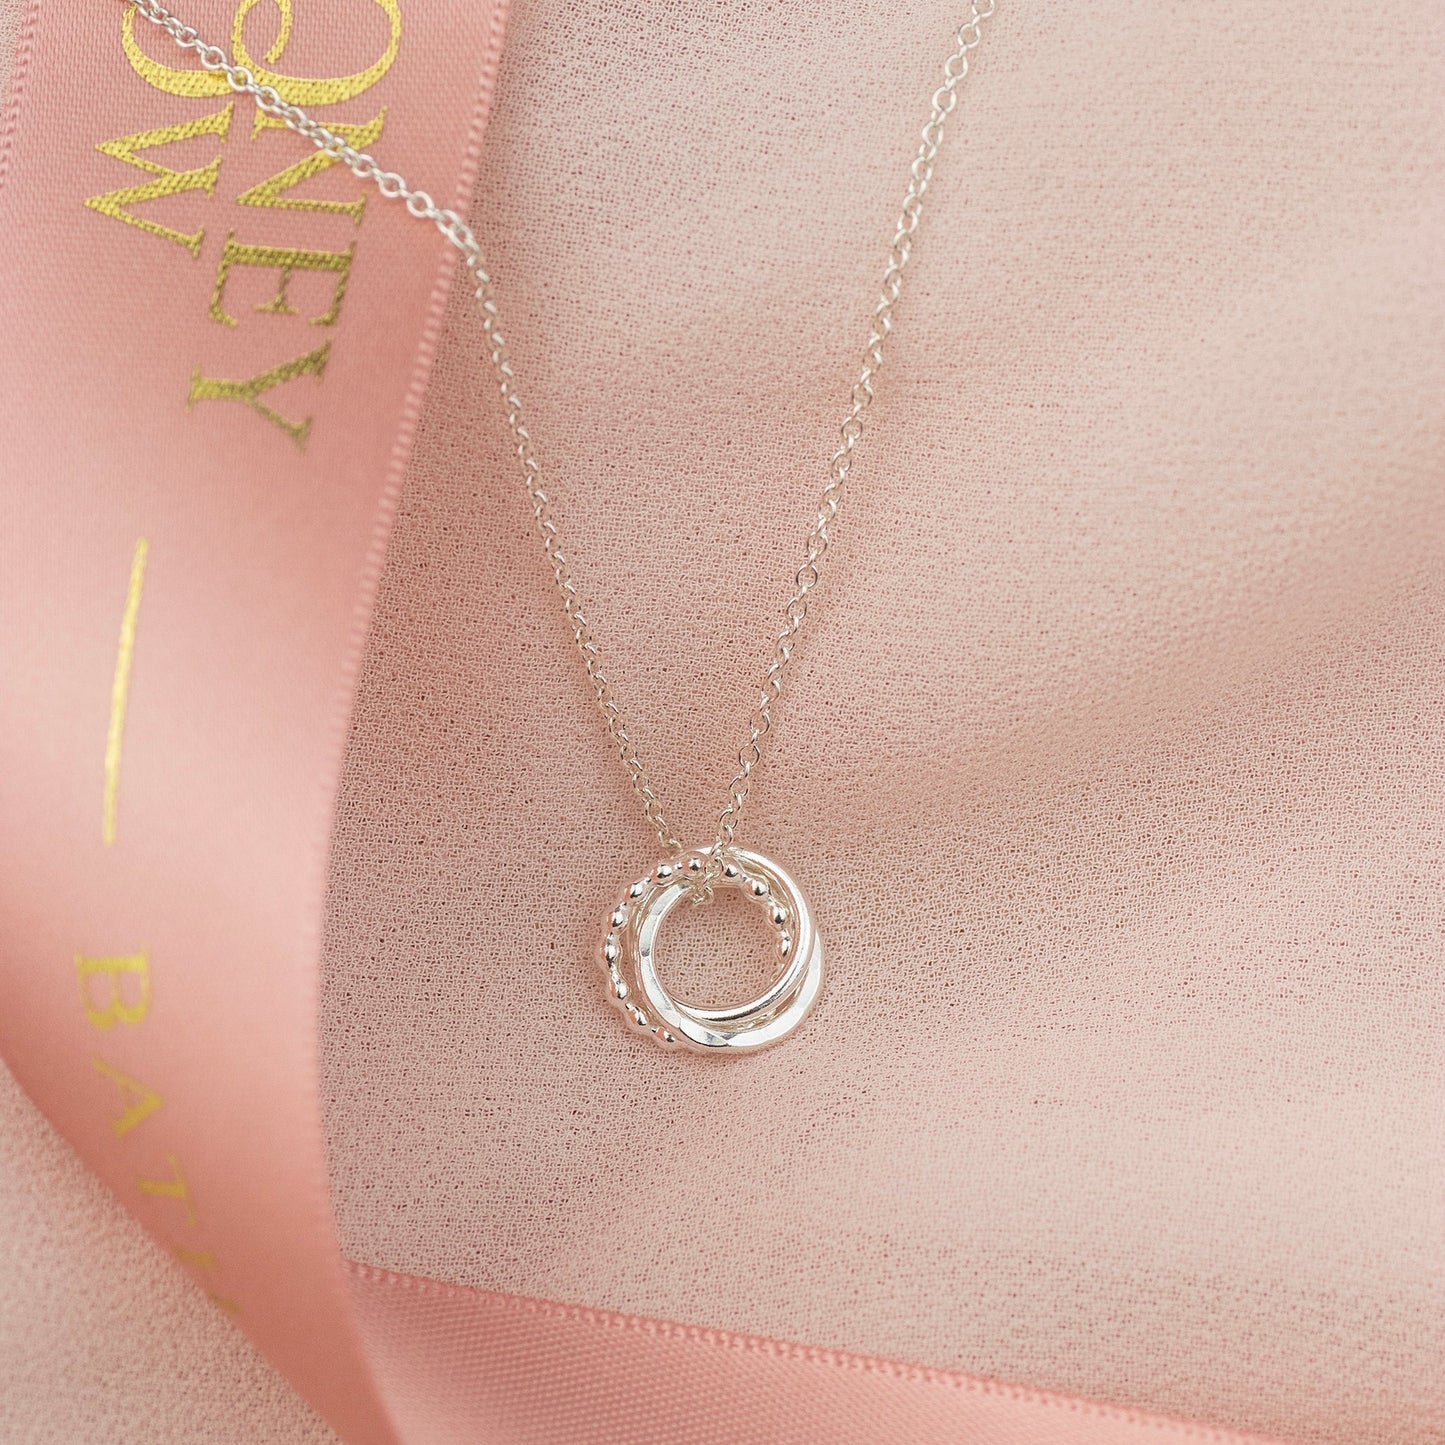 Silver Love Knot Necklaces